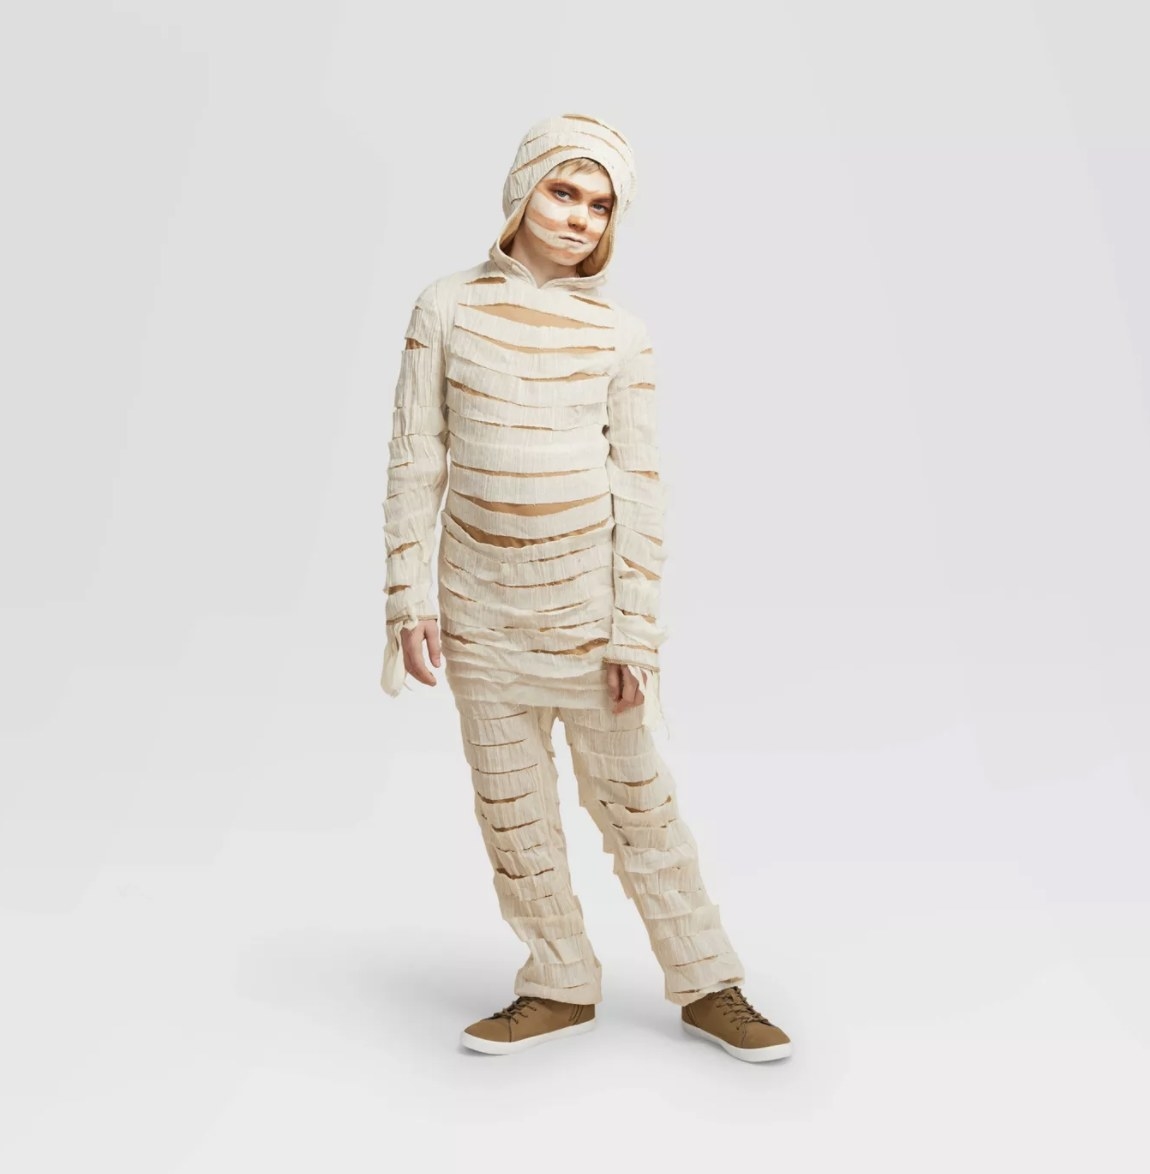 A child wears the ivory-colored bodysuit with white gauze strips